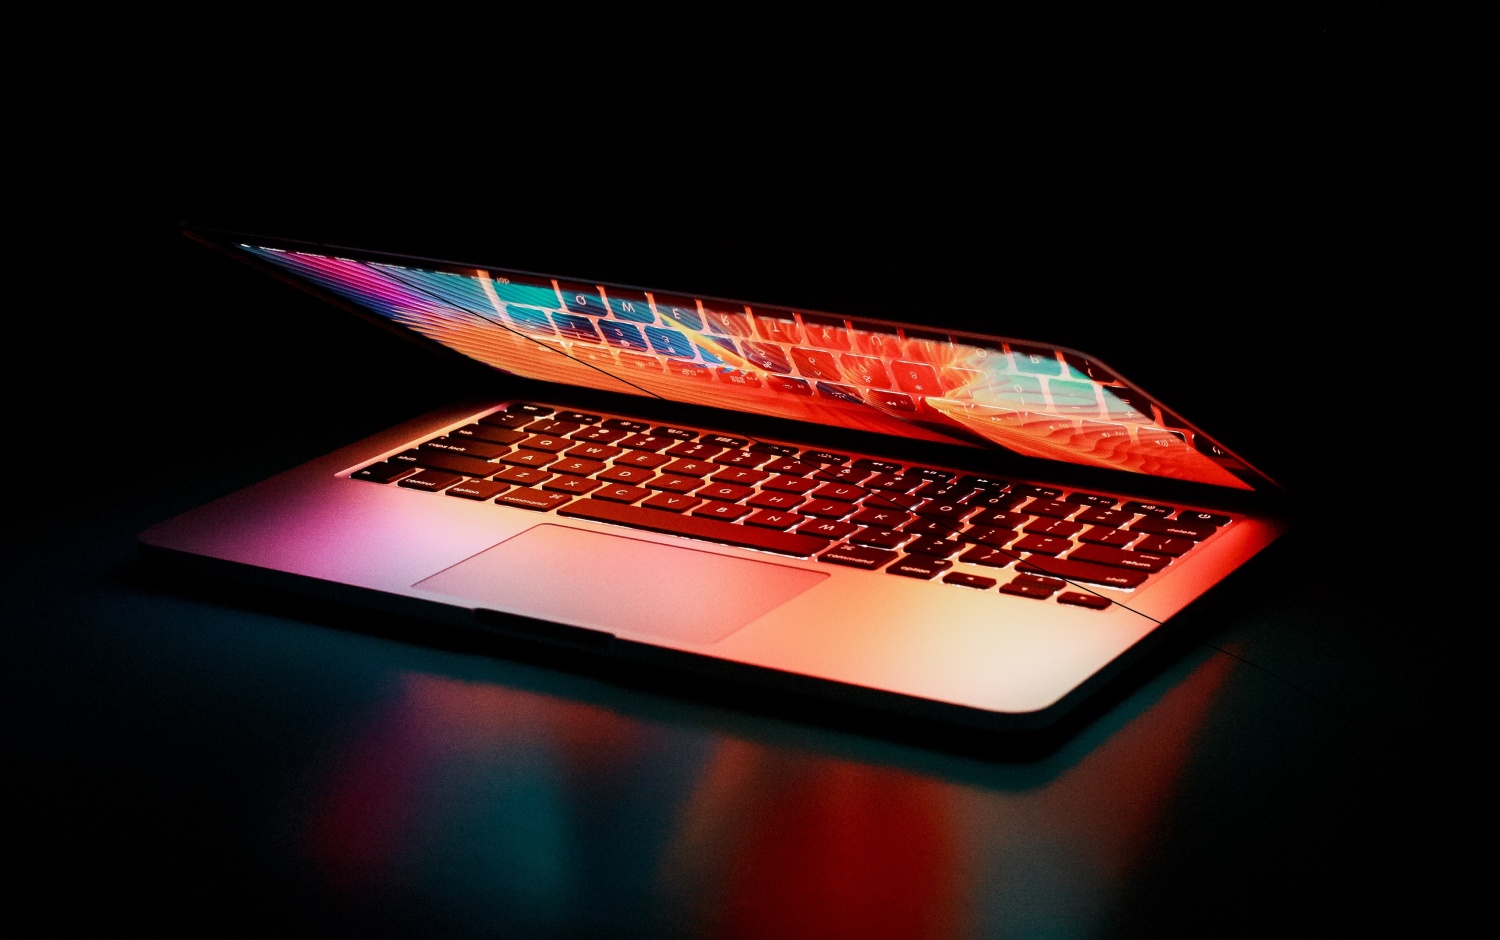 Apple could be working on a 2020 16-inch Mac Book Pro